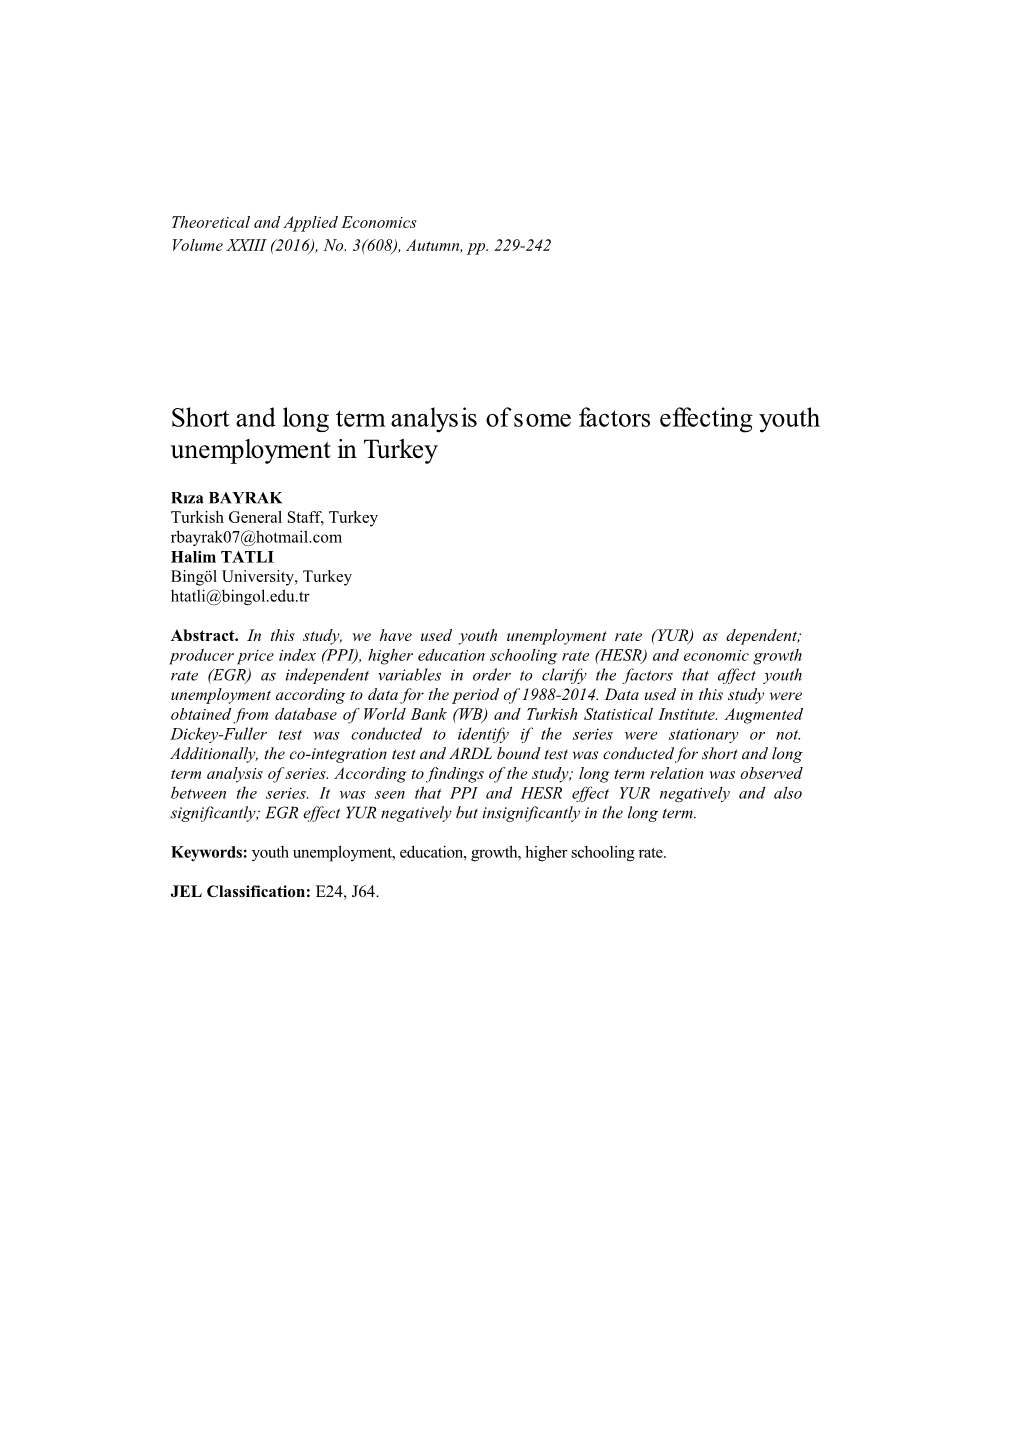 Short and Long Term Analysis of Some Factors Effecting Youth Unemployment in Turkey